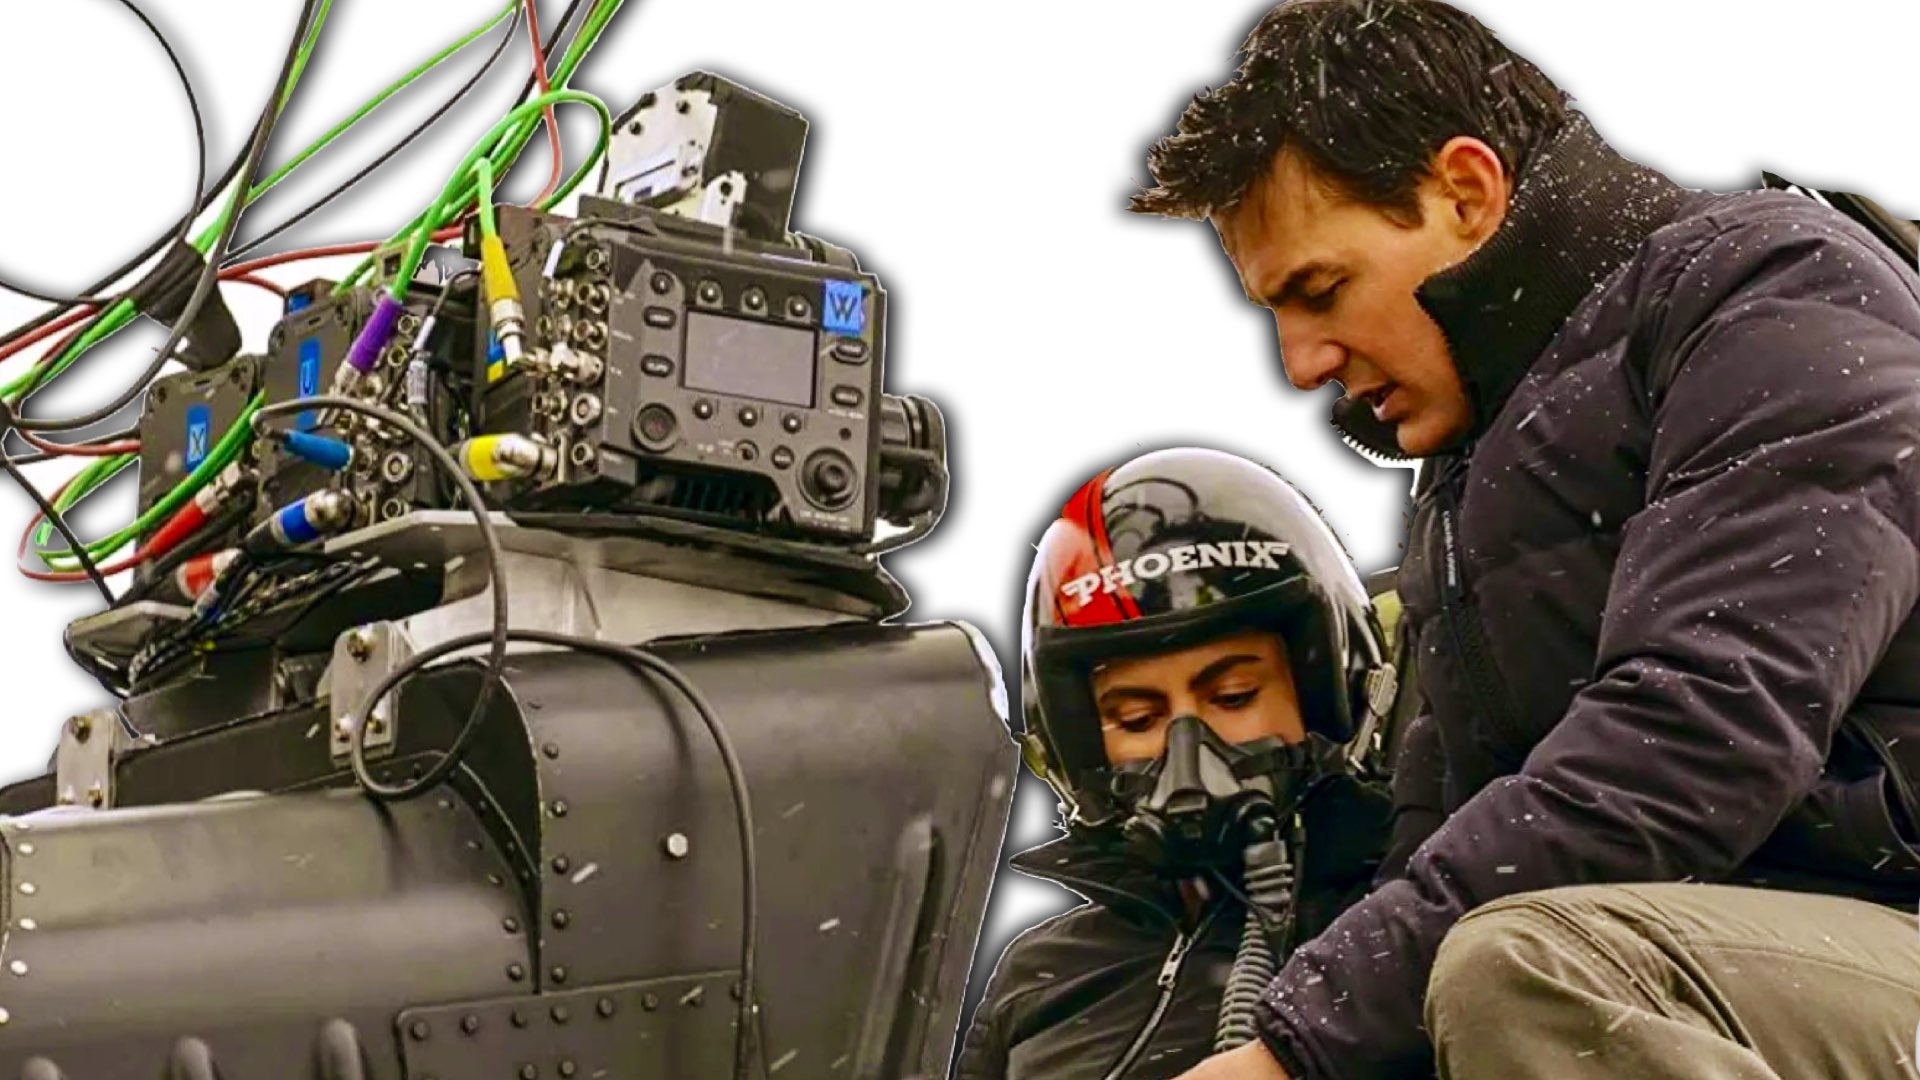 Tom Cruise Taught Actors How To Operate Sony VENICE Cameras Inside Fighter Jets in Top Gun: Maverick